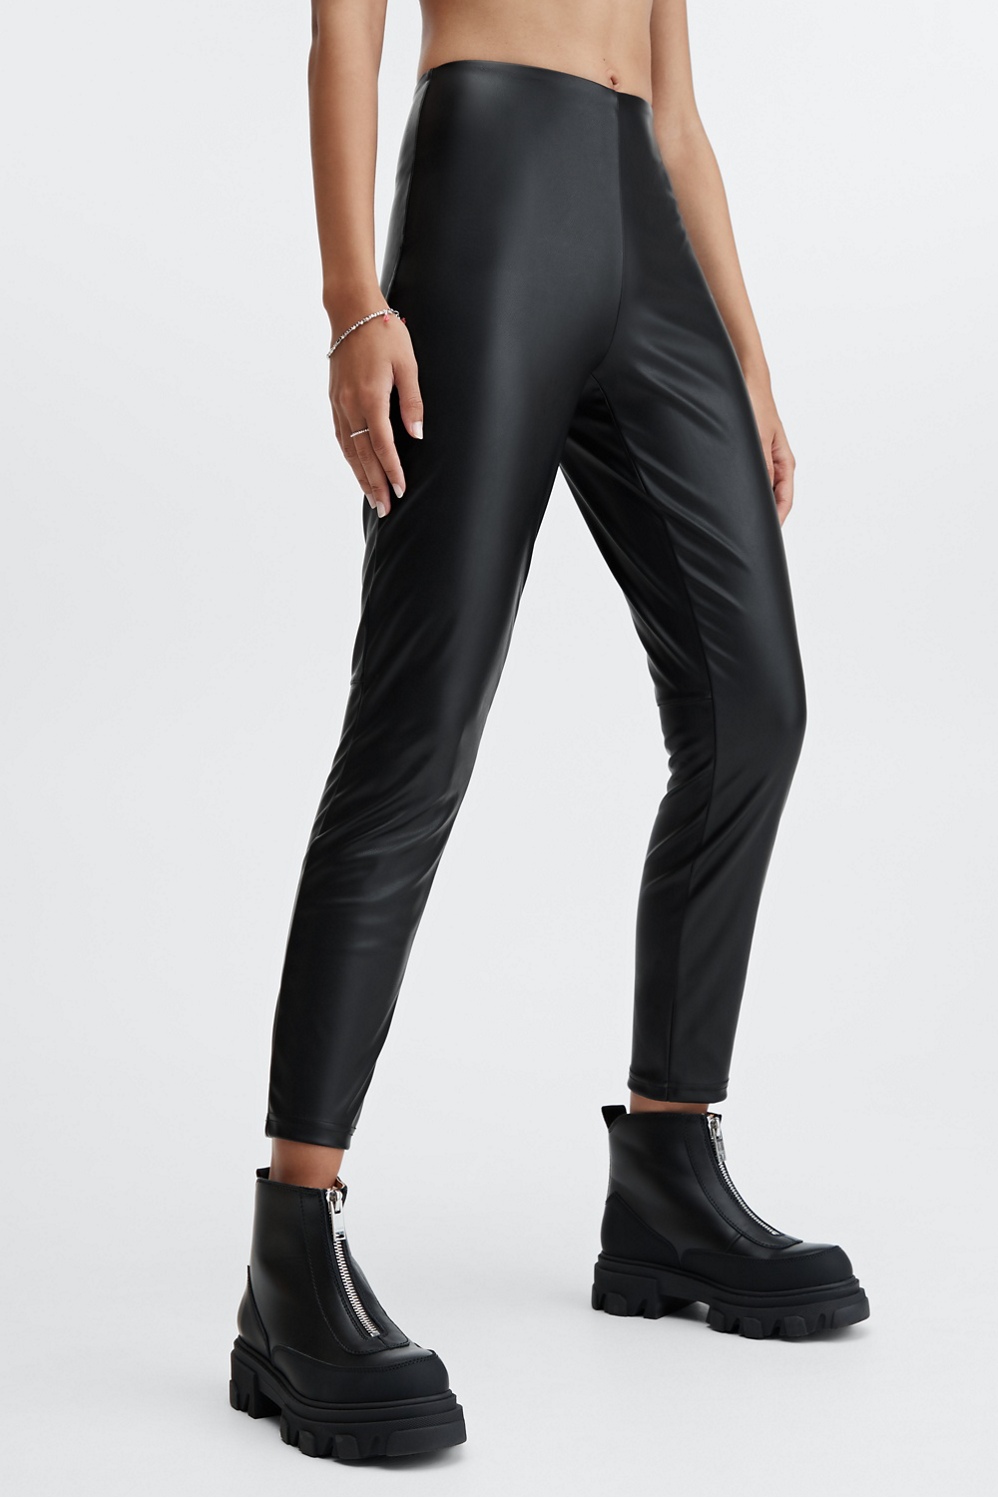 BIVIGAOS Womens High Waist Black Fleece Matte Leather Leggings With Lift  And Buttock Support Autumn/Winter Slim Skinny Ladies Leather Trousers  211008 From Lu006, $22.73